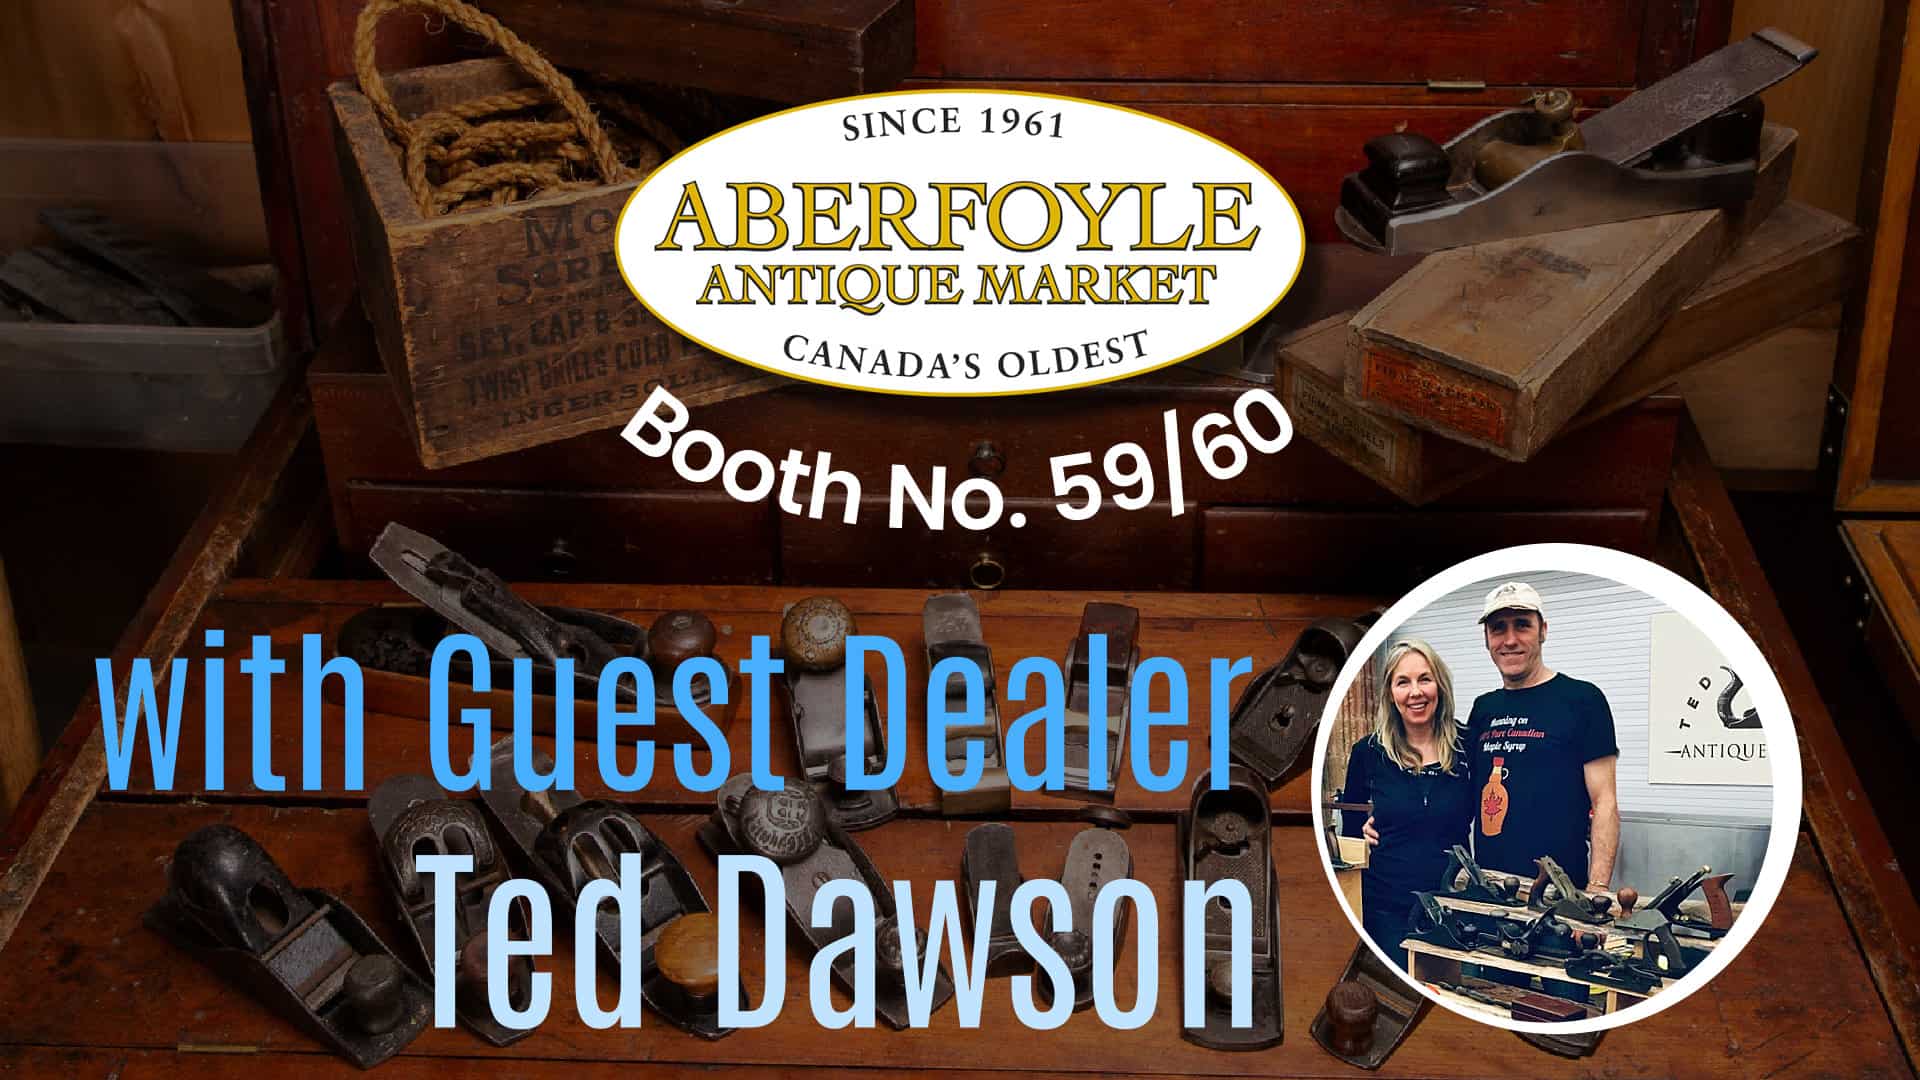 At The Aberfoyle Antique Market-with Guest Dealer Ted Dawson